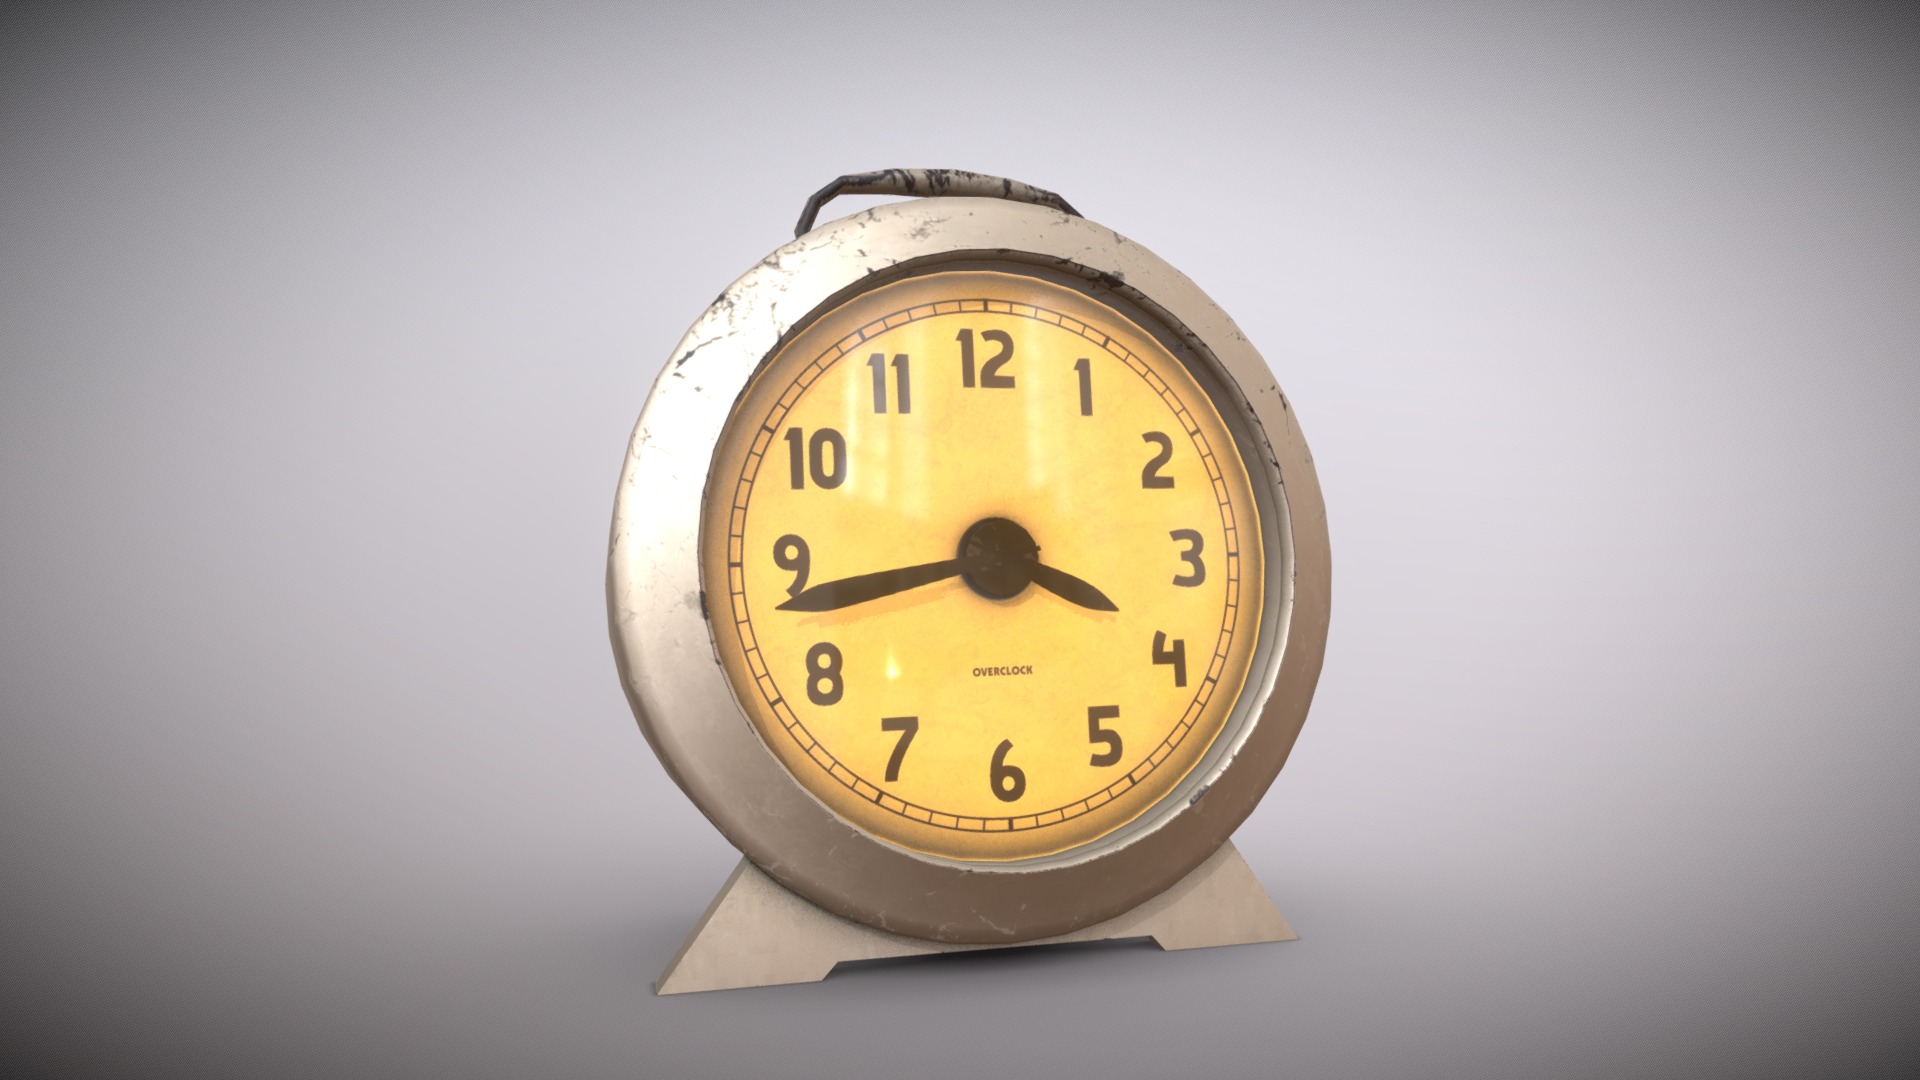 3D model Desktop clock 4 of 20 - This is a 3D model of the Desktop clock 4 of 20. The 3D model is about a clock on a stand.